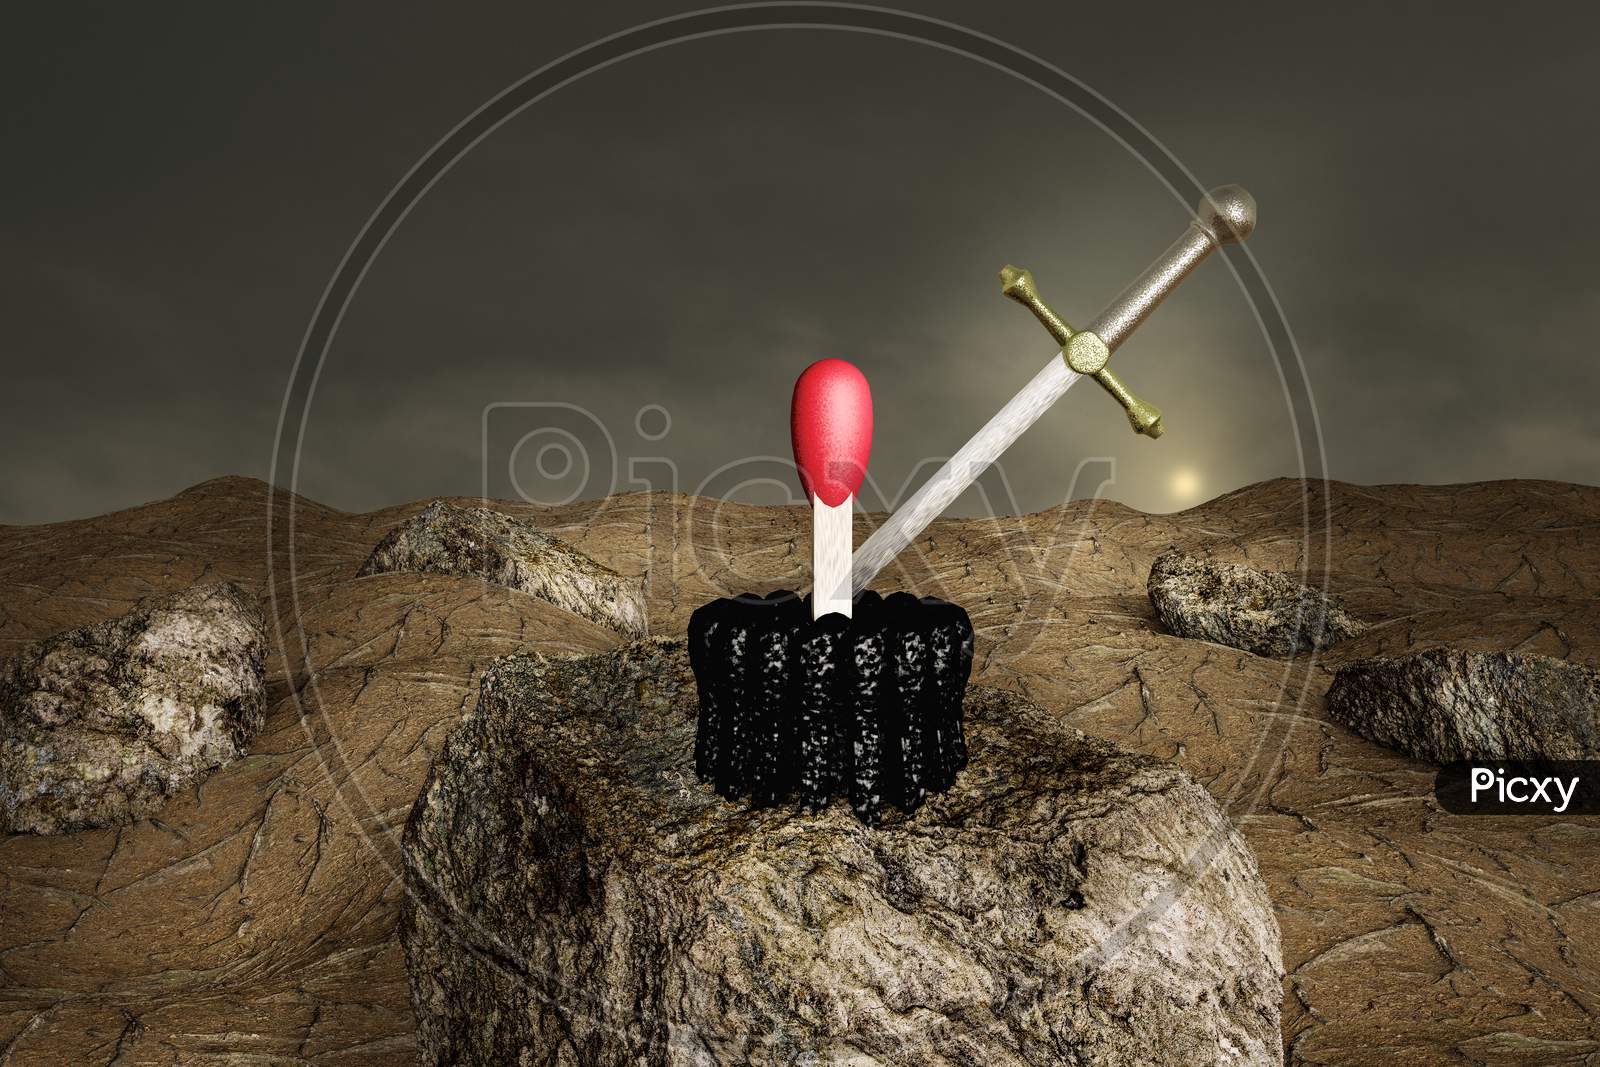 Excalibur In A Match With A Group Of Burnt Matches Around It On Stone At Sunset Day. Standing Out From The Crowd Or Go Your Own Way Or Being Different Or Power Or Think Differently. 3D Illustration